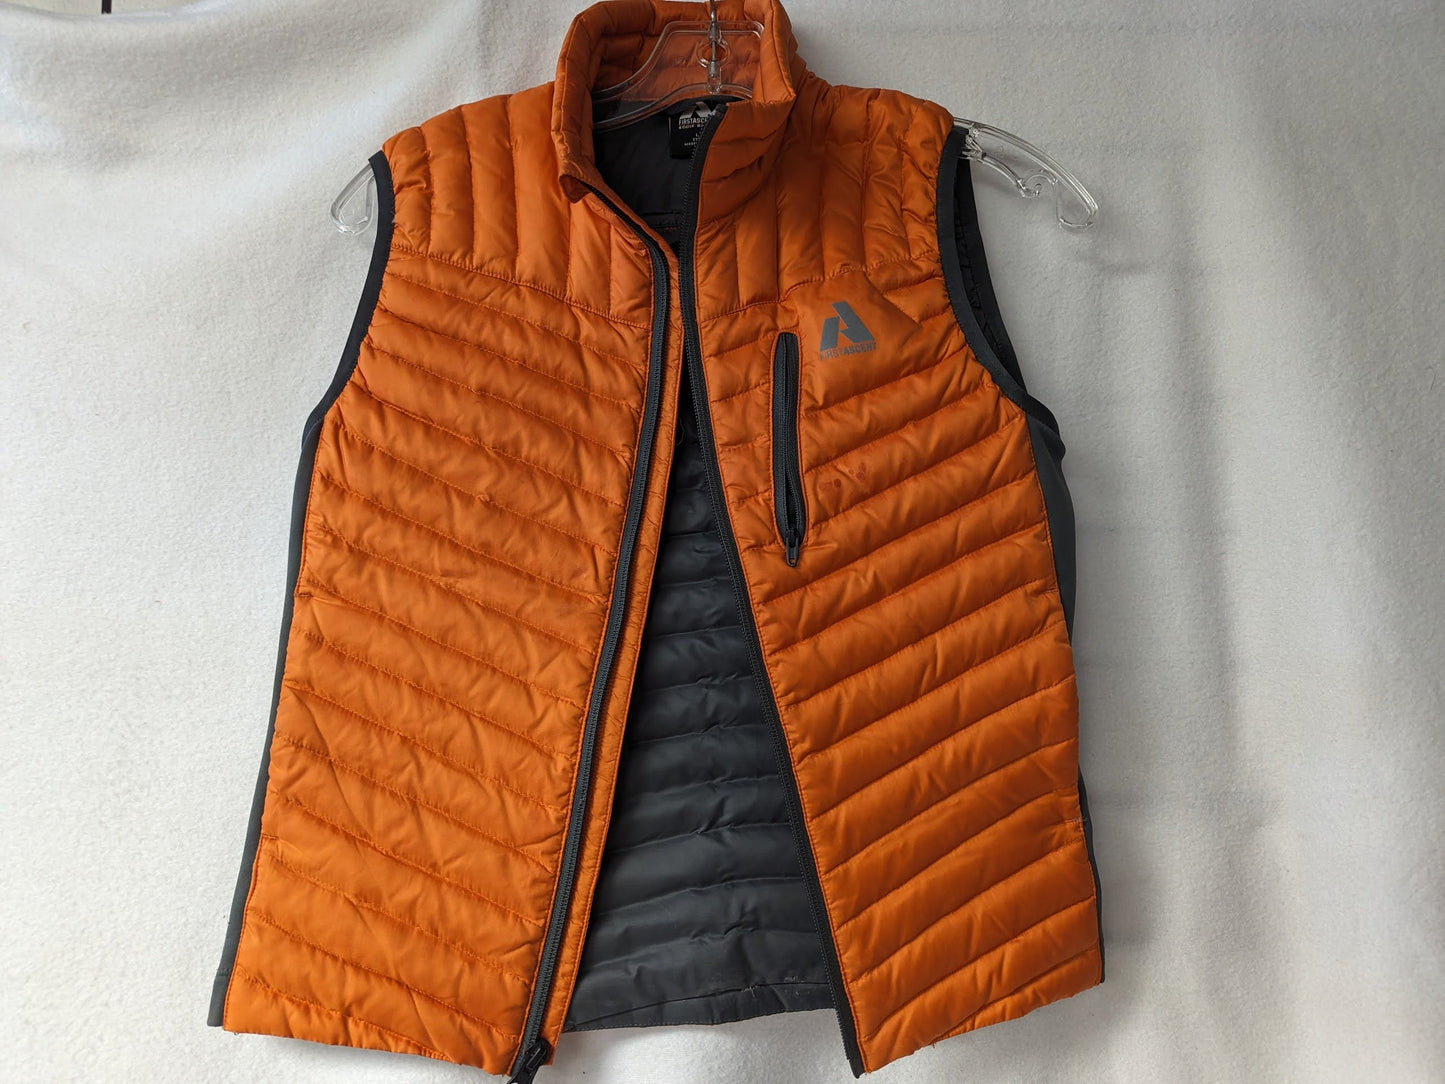 Eddie Bauer First Ascent Youth Puffer Vest Size Youth Large Color Orange Condition Used